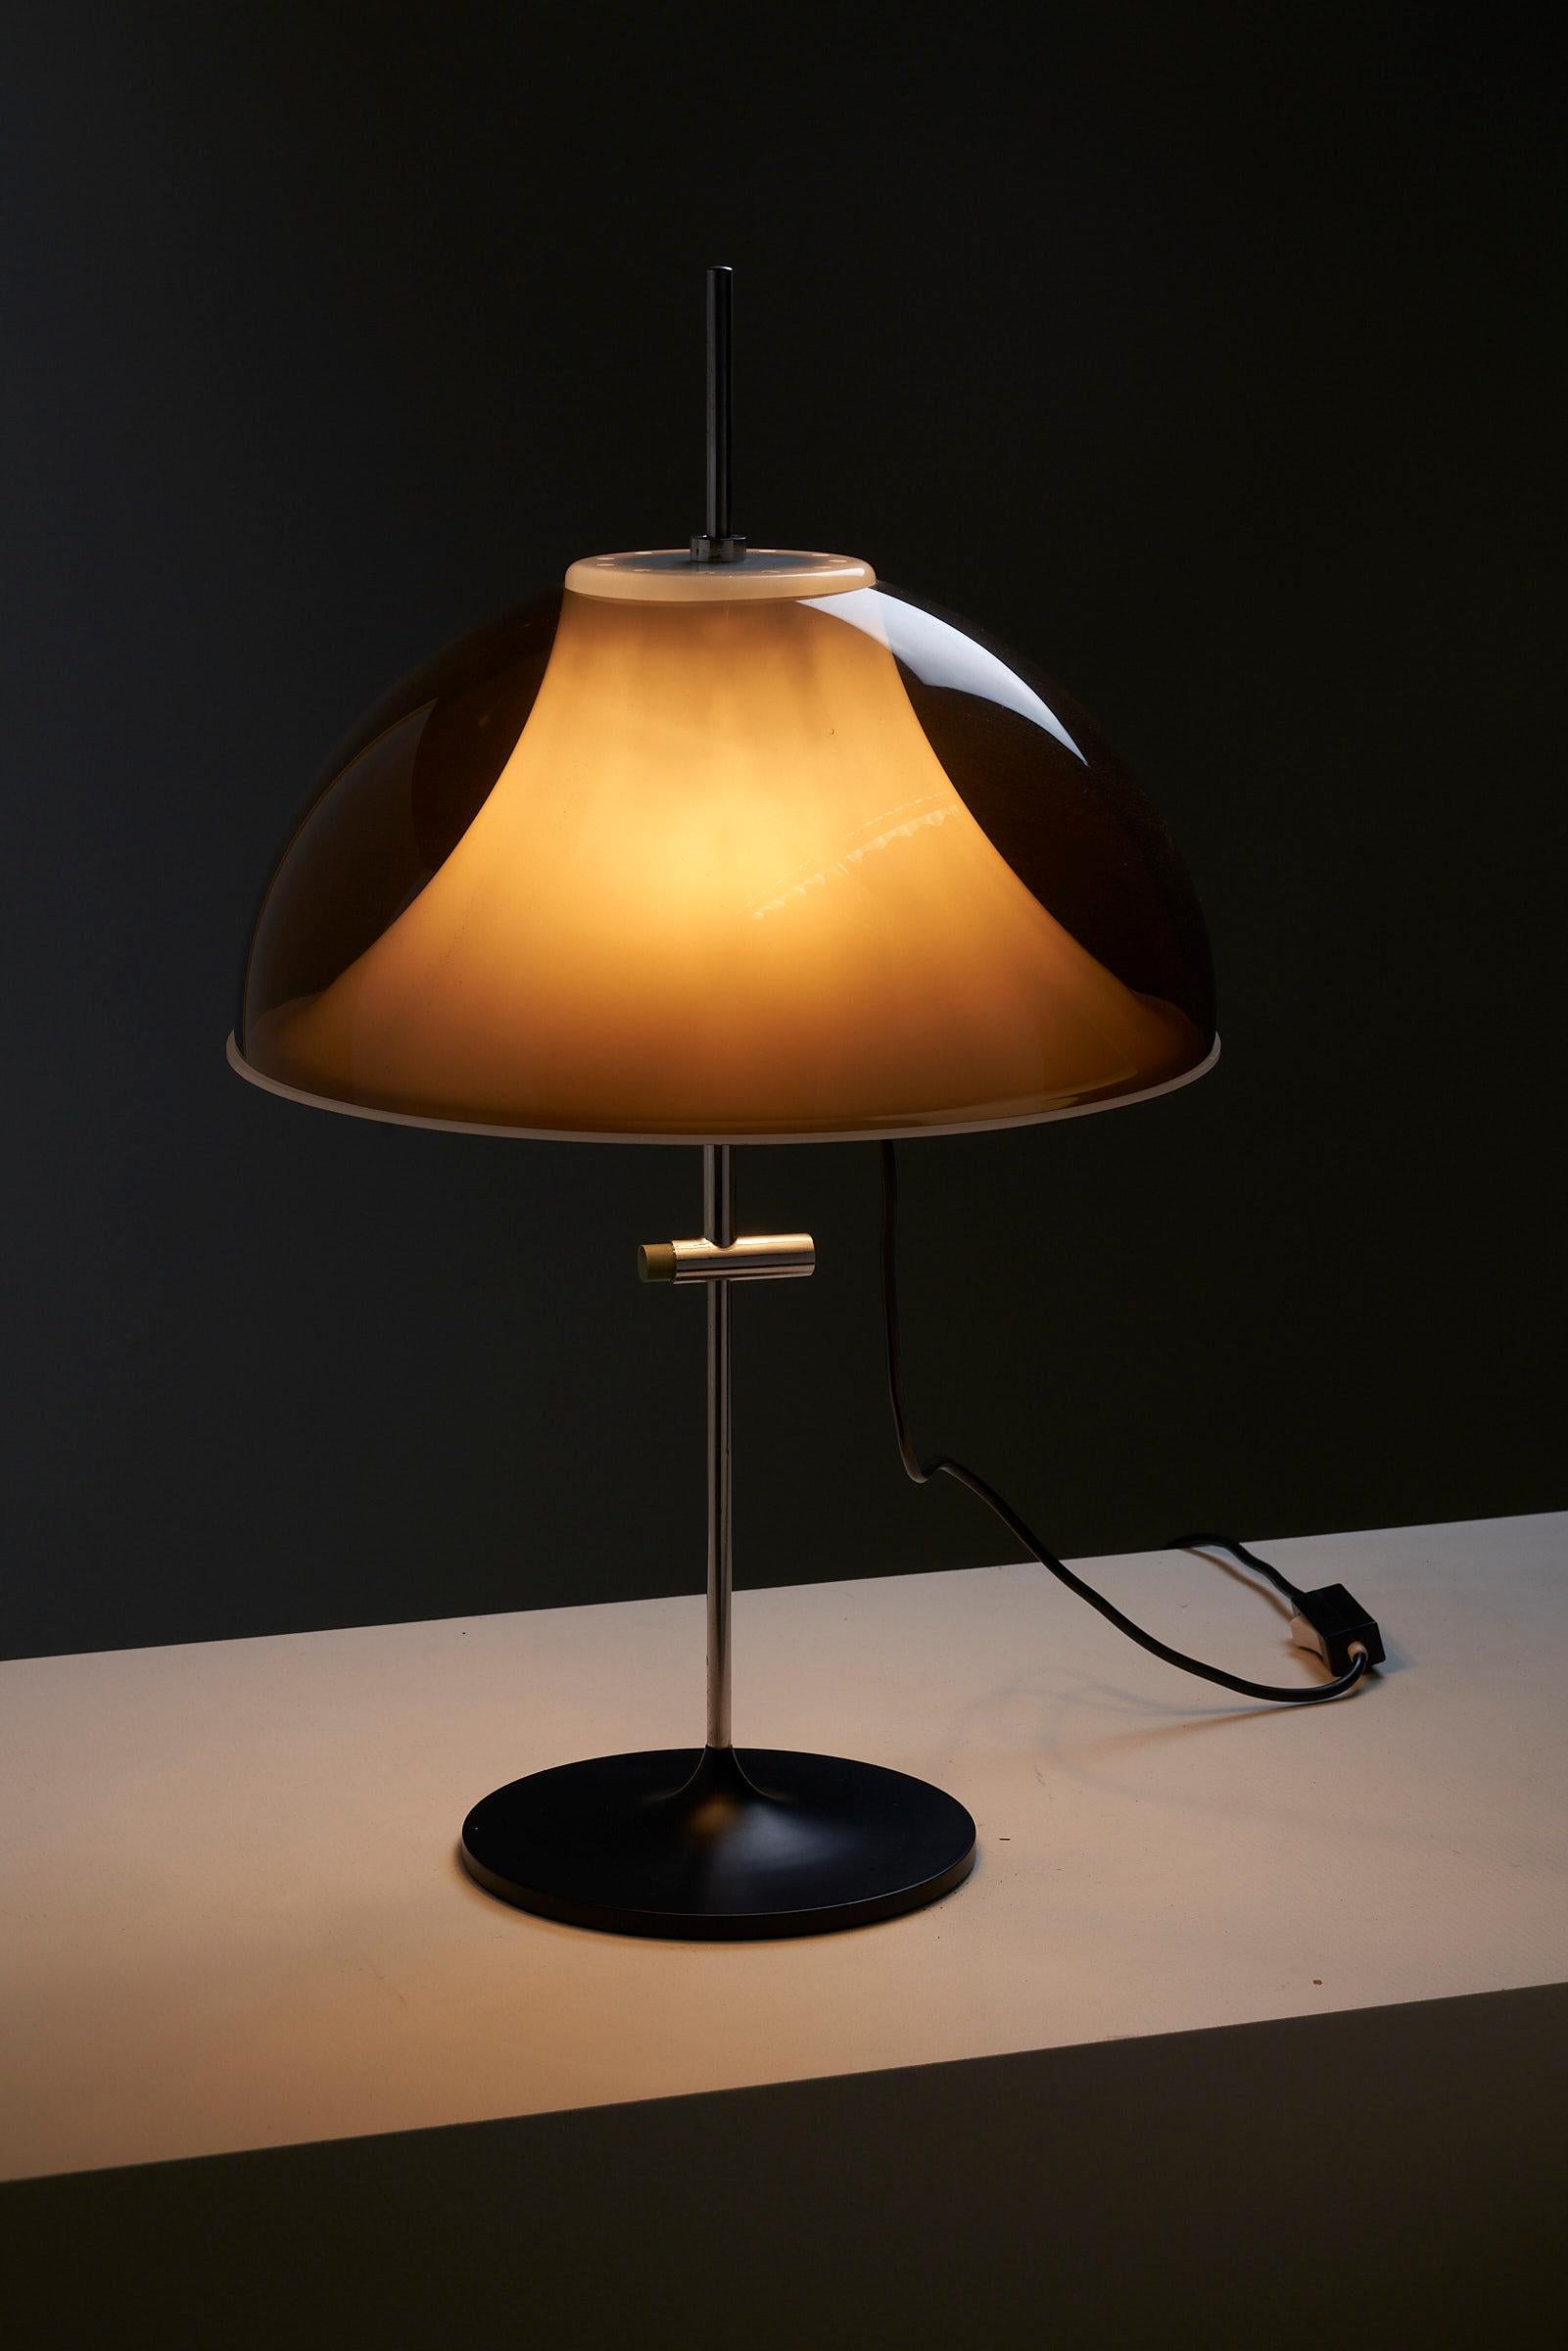 Transport yourself back to the iconic midcentury period with this extraordinary table lamp that embraces the captivating aesthetics of the Space Age style. With its distinctive design elements, it captures the essence of the era's futuristic